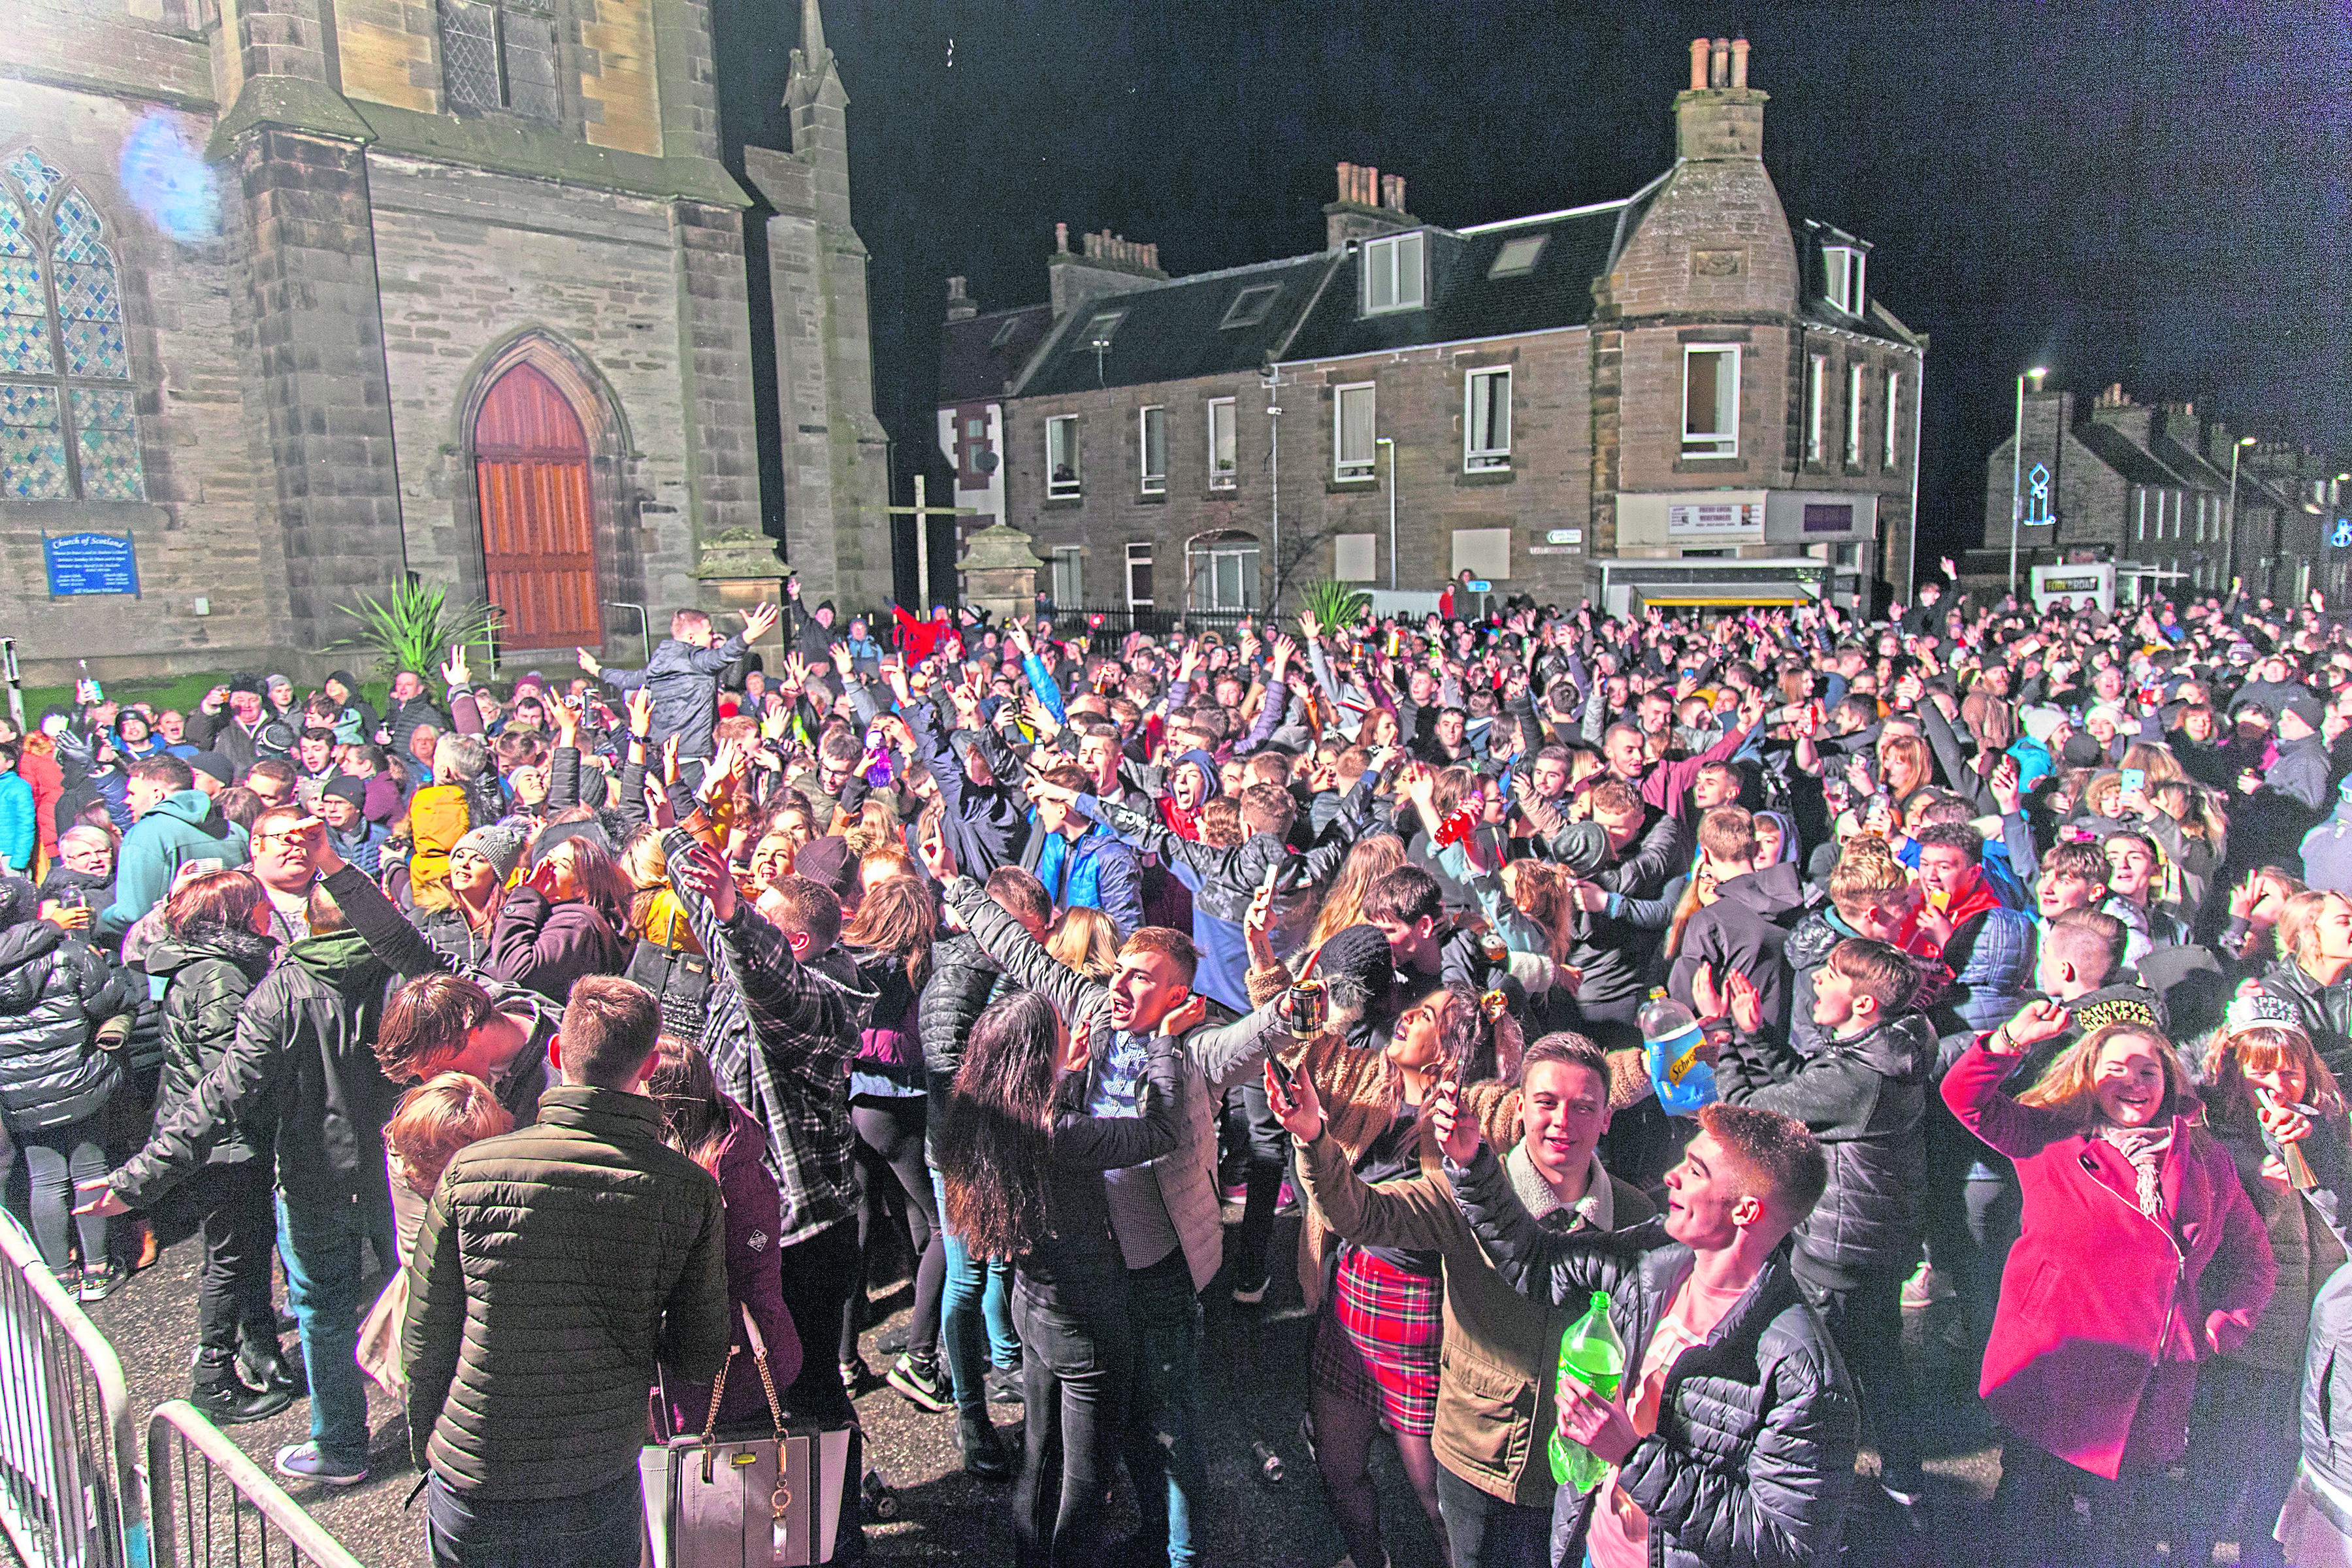 People gather by the town clock in Thurso to bring in the new year in 2019.